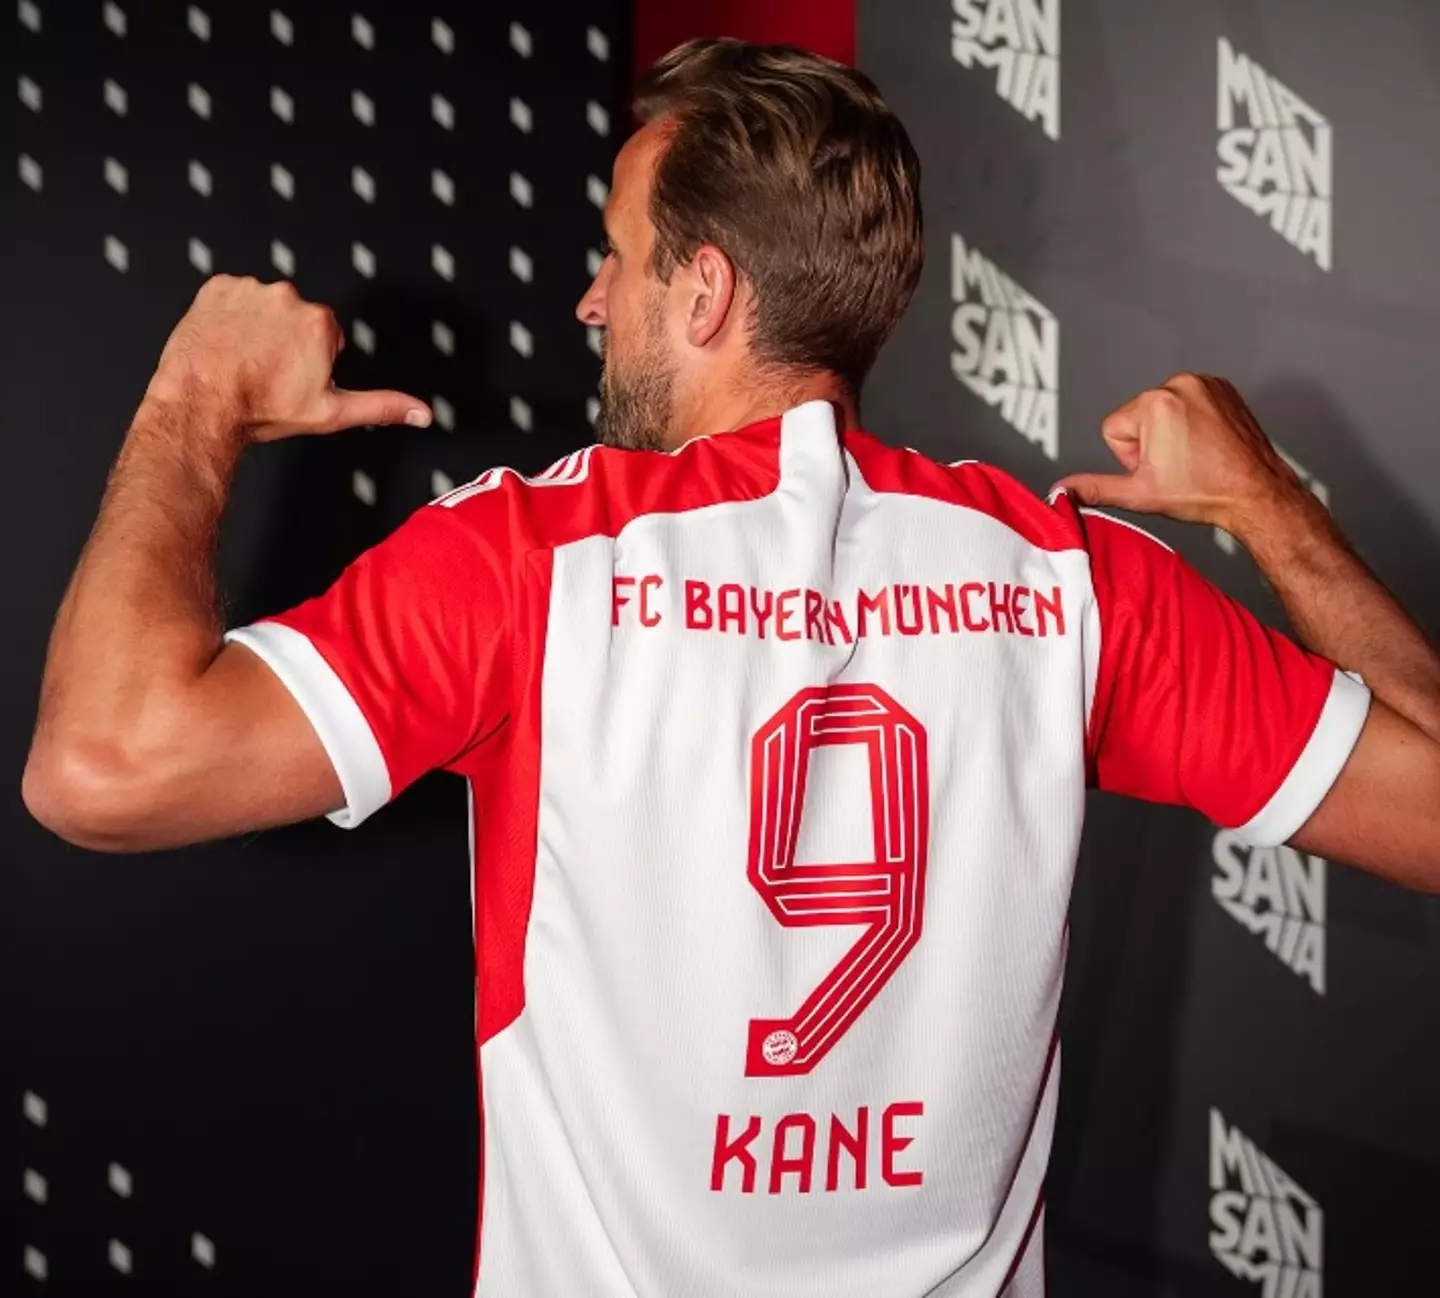 Look away now Spurs fans, it's one of your own in a Bayern shirt.